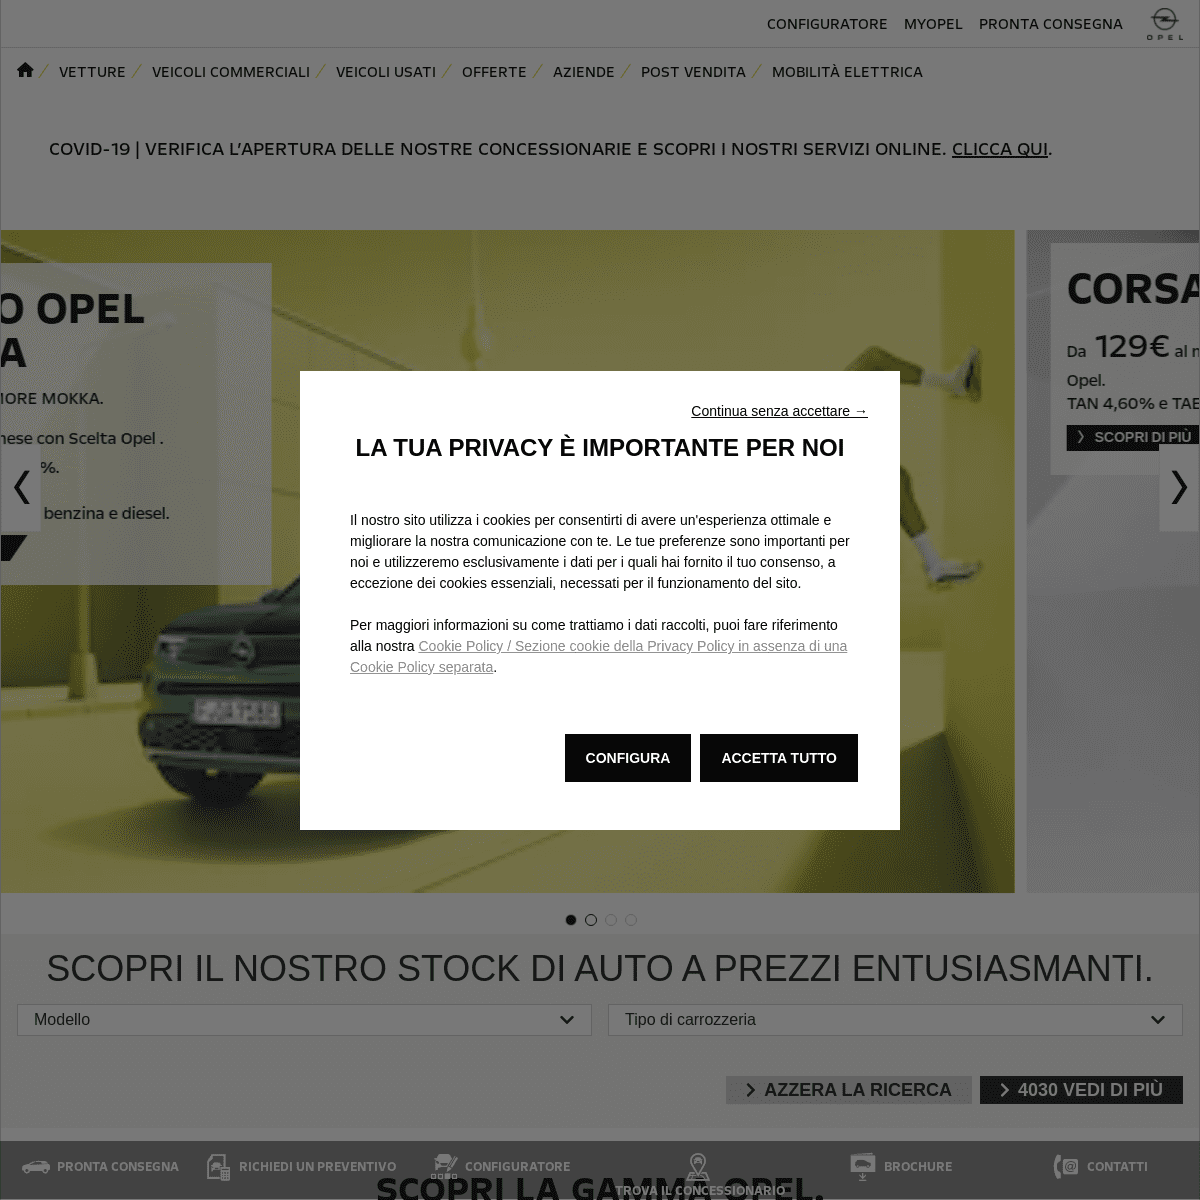 A complete backup of https://opel.it